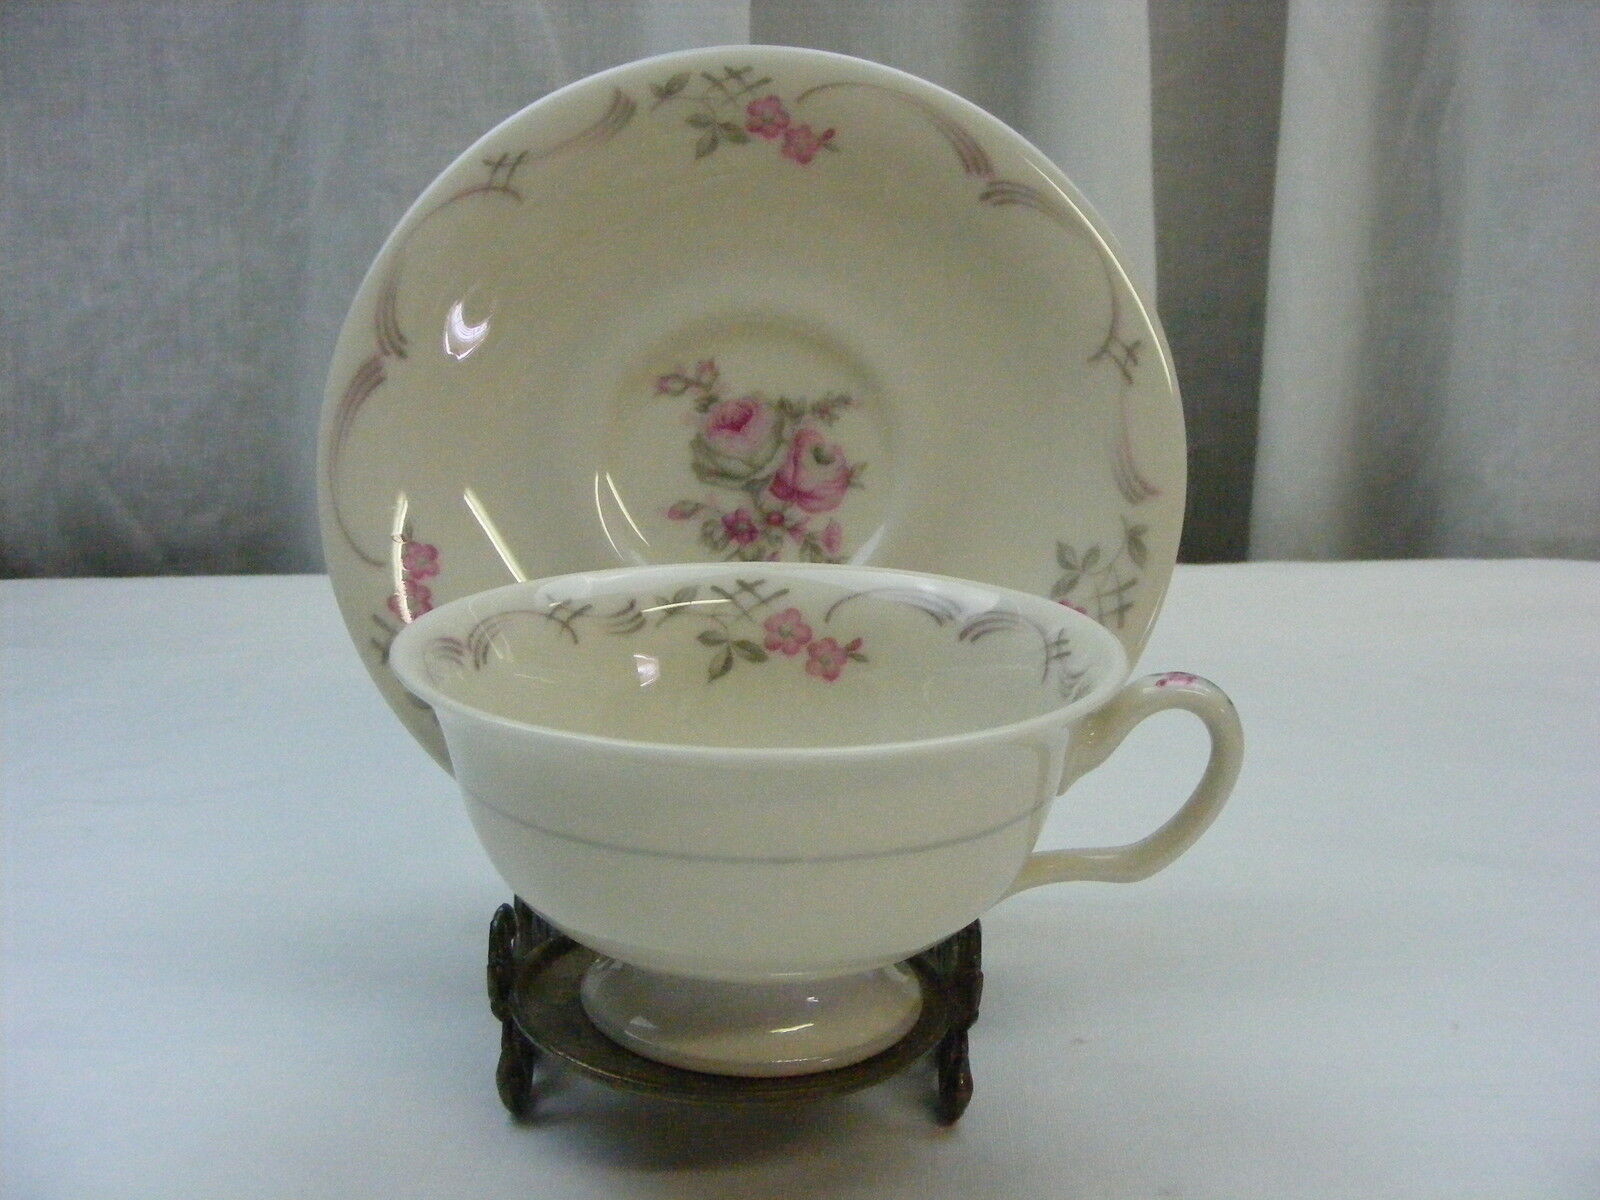 Vintage Cup & Saucer Castleton China Belrose Made in USA Pink and Gray Rose